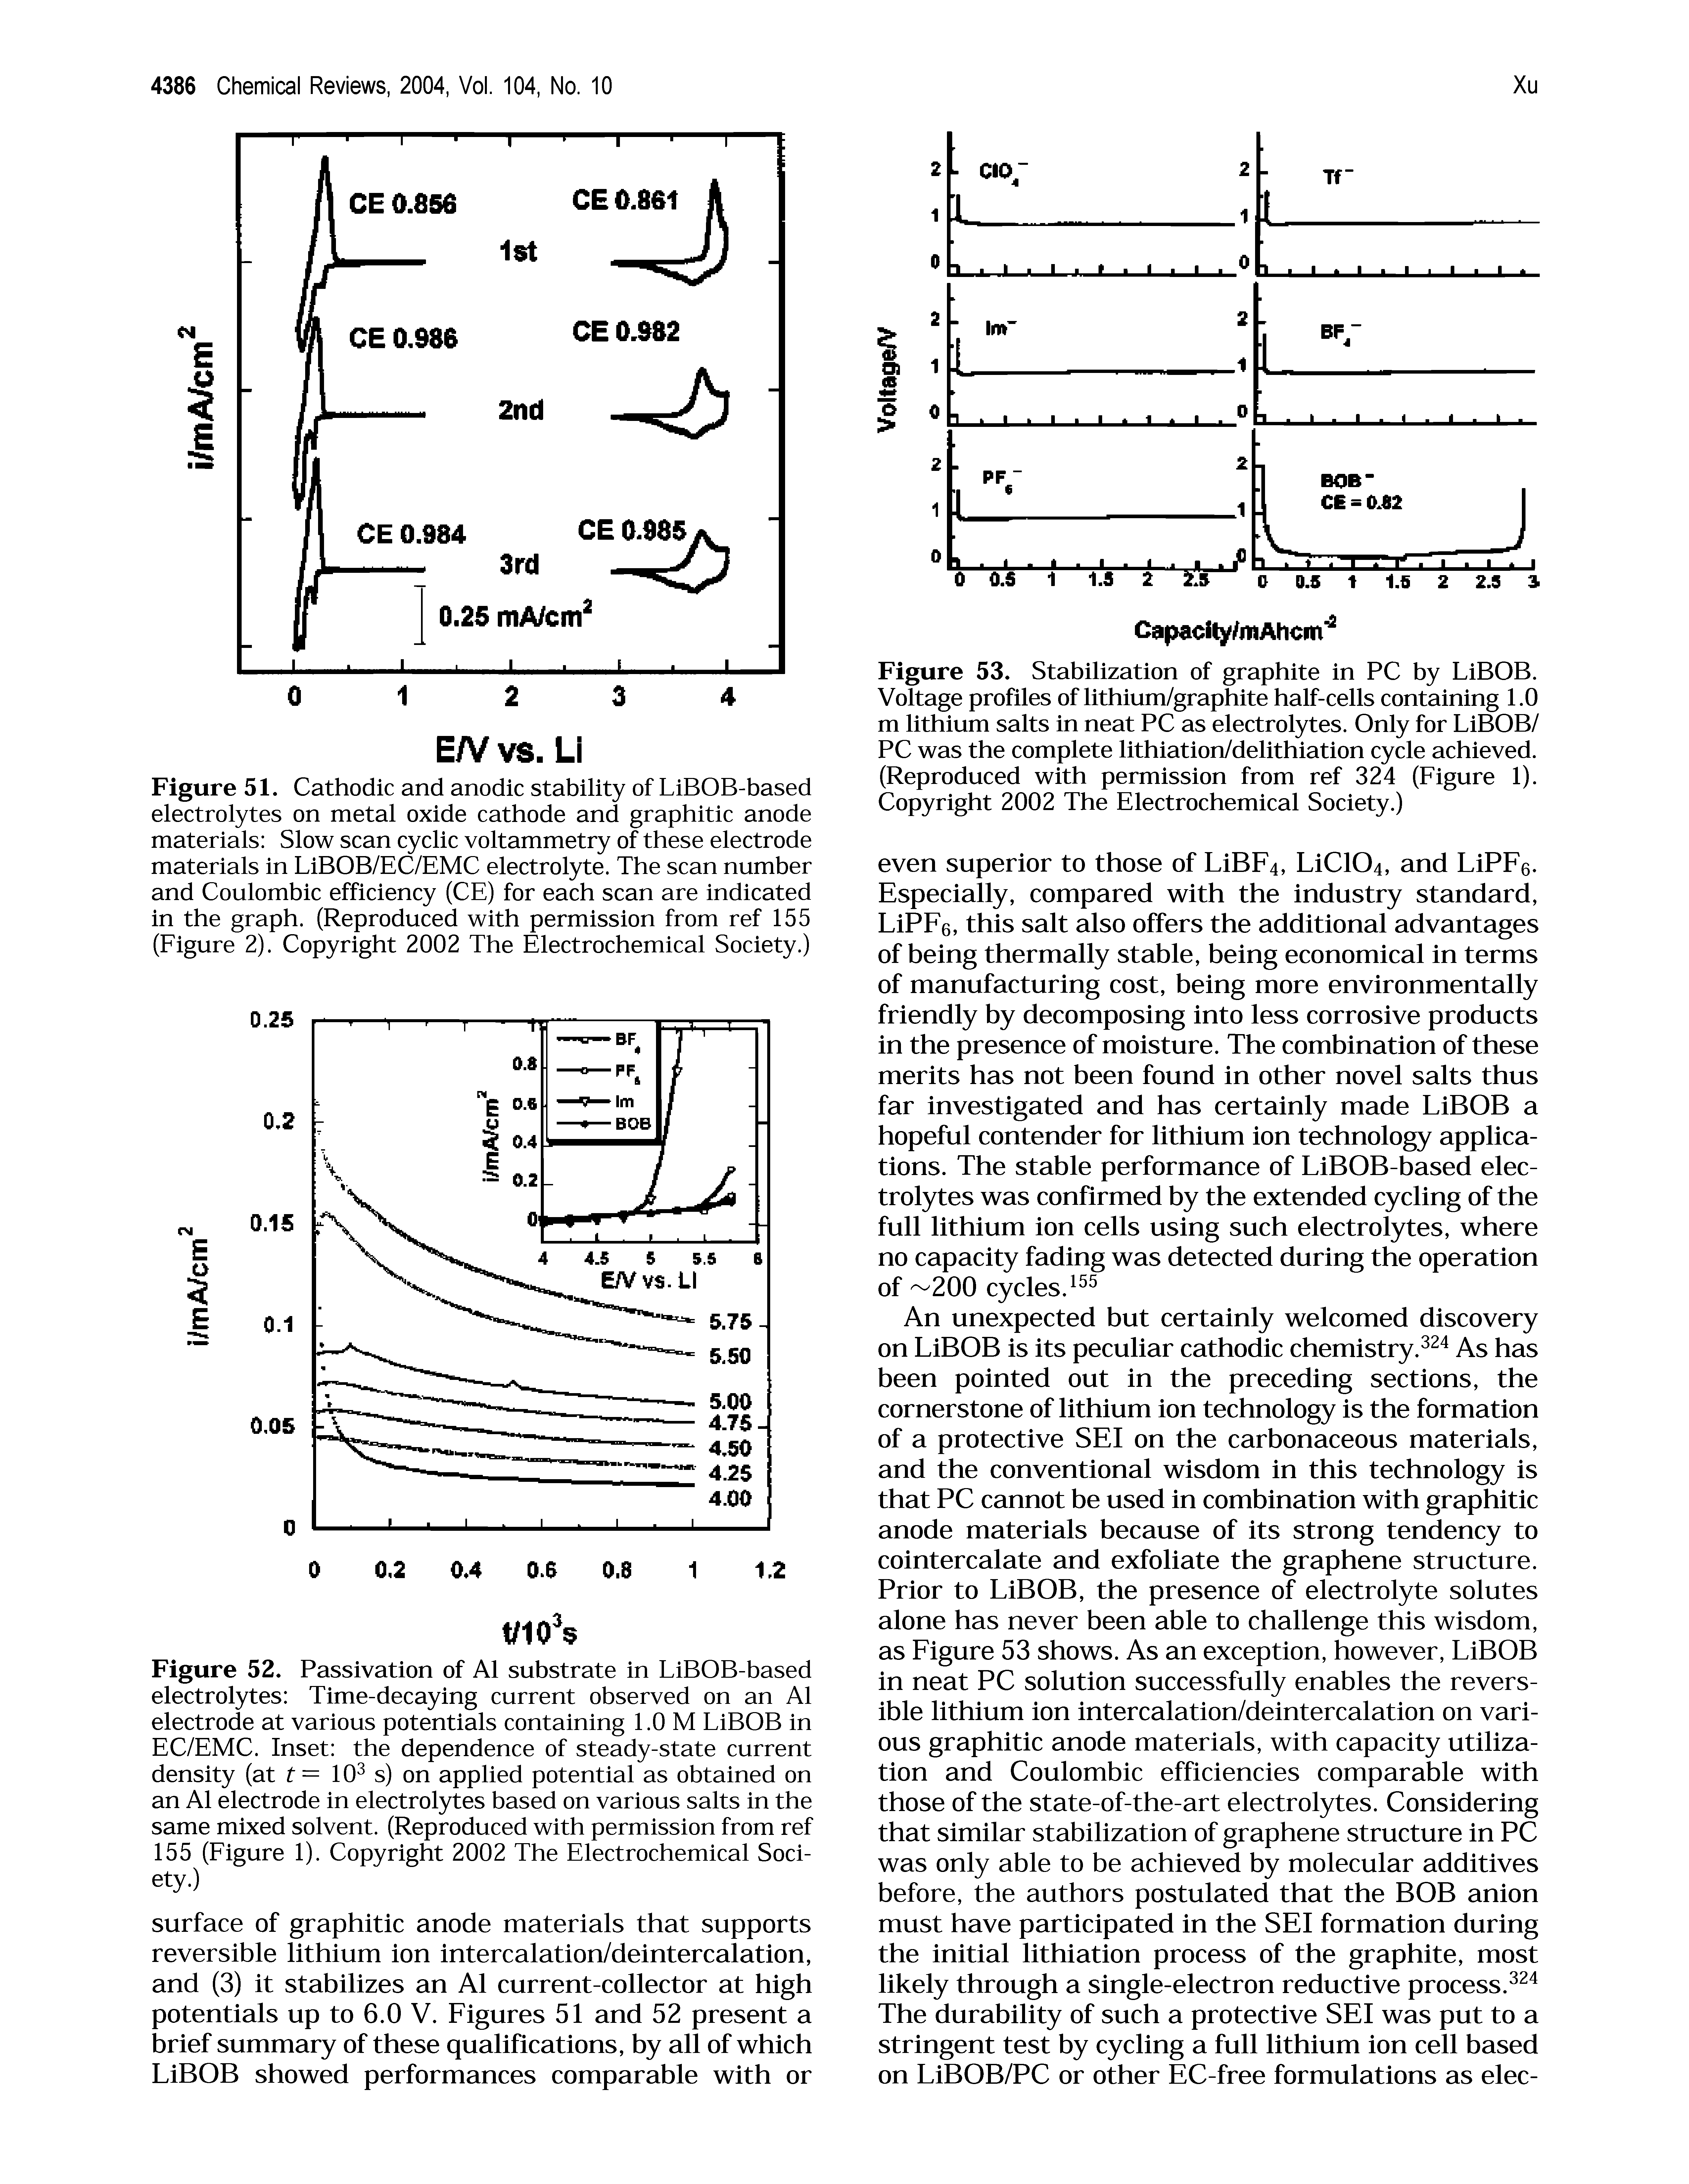 Figure 52. Passivation of A1 substrate in LiBOB-based electrolytes Time-decaying current observed on an A1 electrode at various potentials containing 1.0 M LiBOB in EC/EMC. Inset the dependence of steady-state current density at t= 10 s) on applied potential as obtained on an A1 electrode in electrolytes based on various salts in the same mixed solvent. (Reproduced with permission from ref 155 (Eigure 1). Copyright 2002 The Electrochemical Society.)...